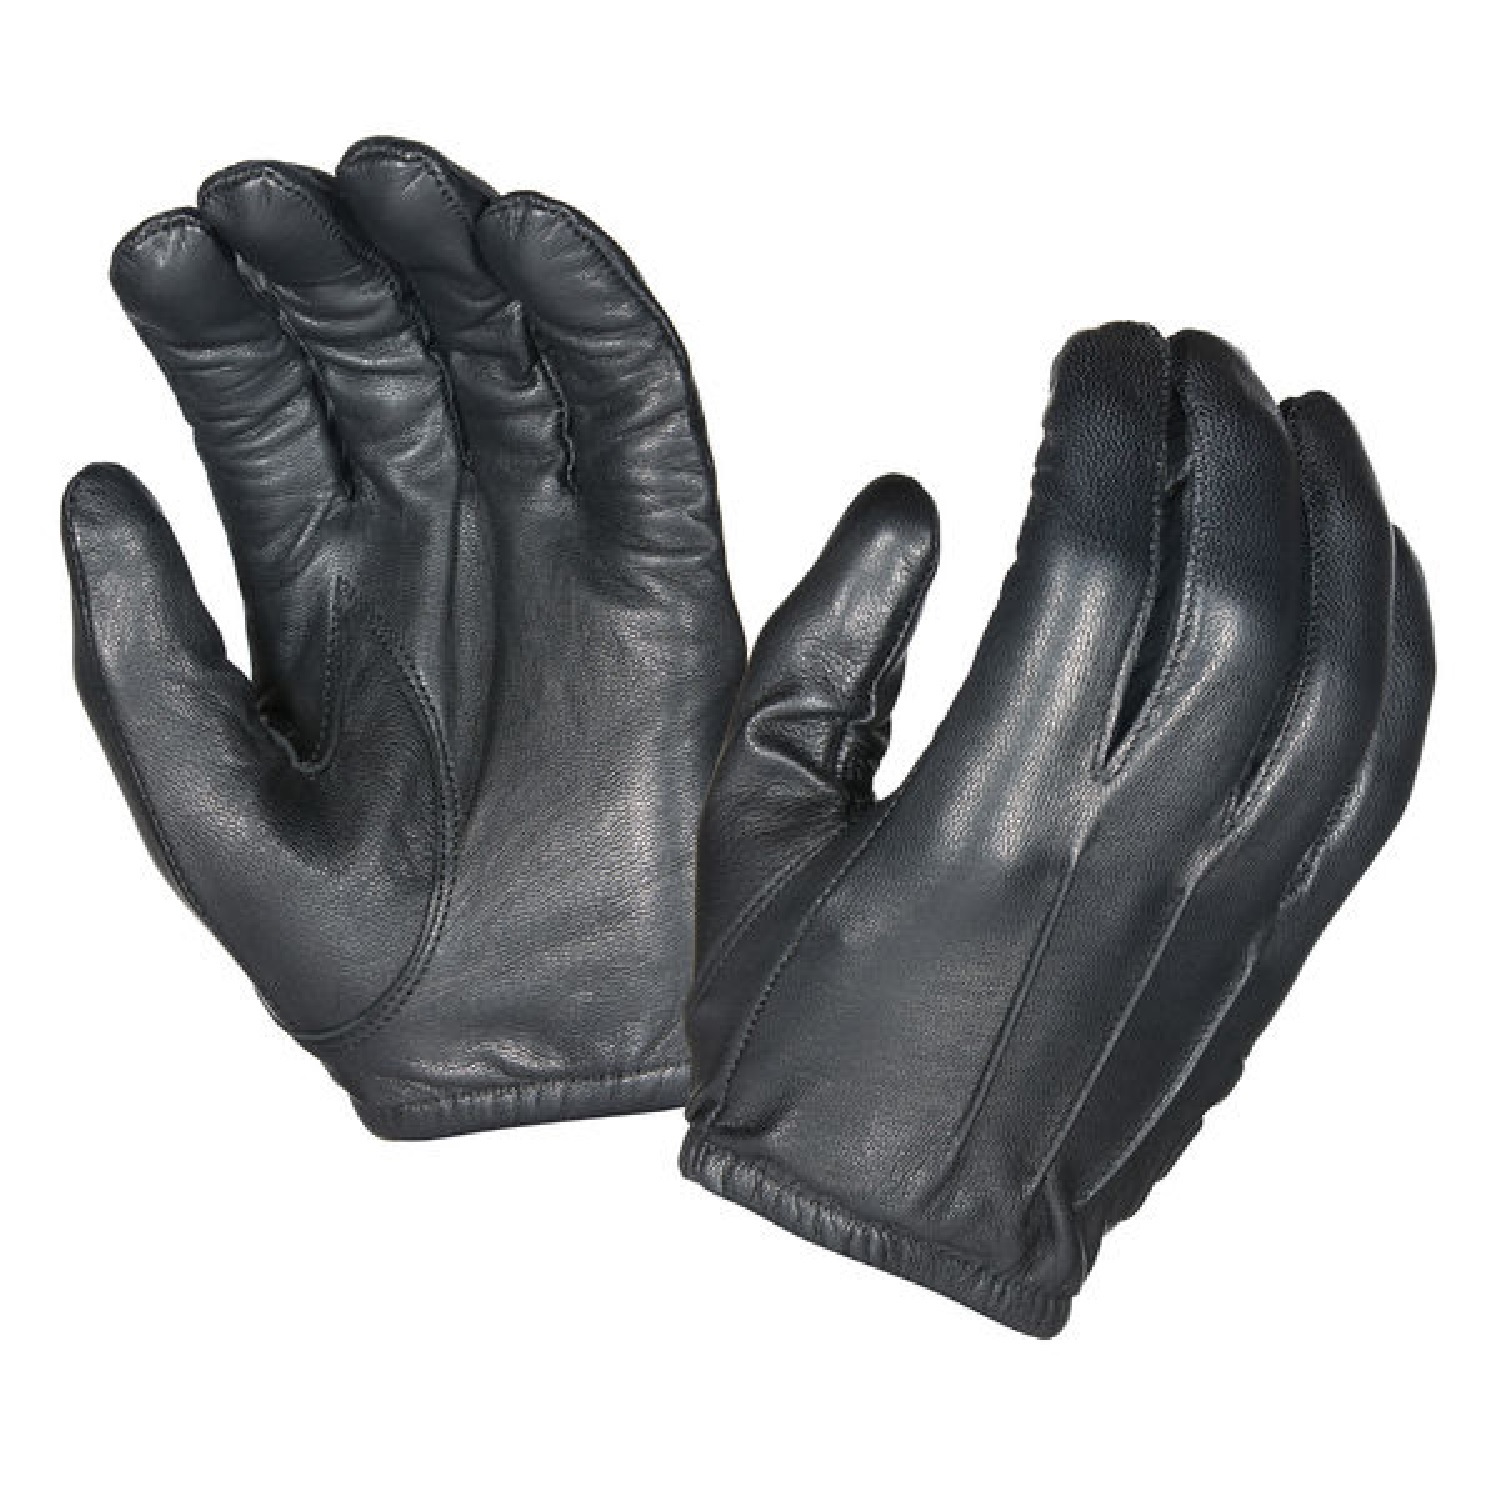 Hatch RFK300 Cut-Resistant Glove with Kevlar Size Large